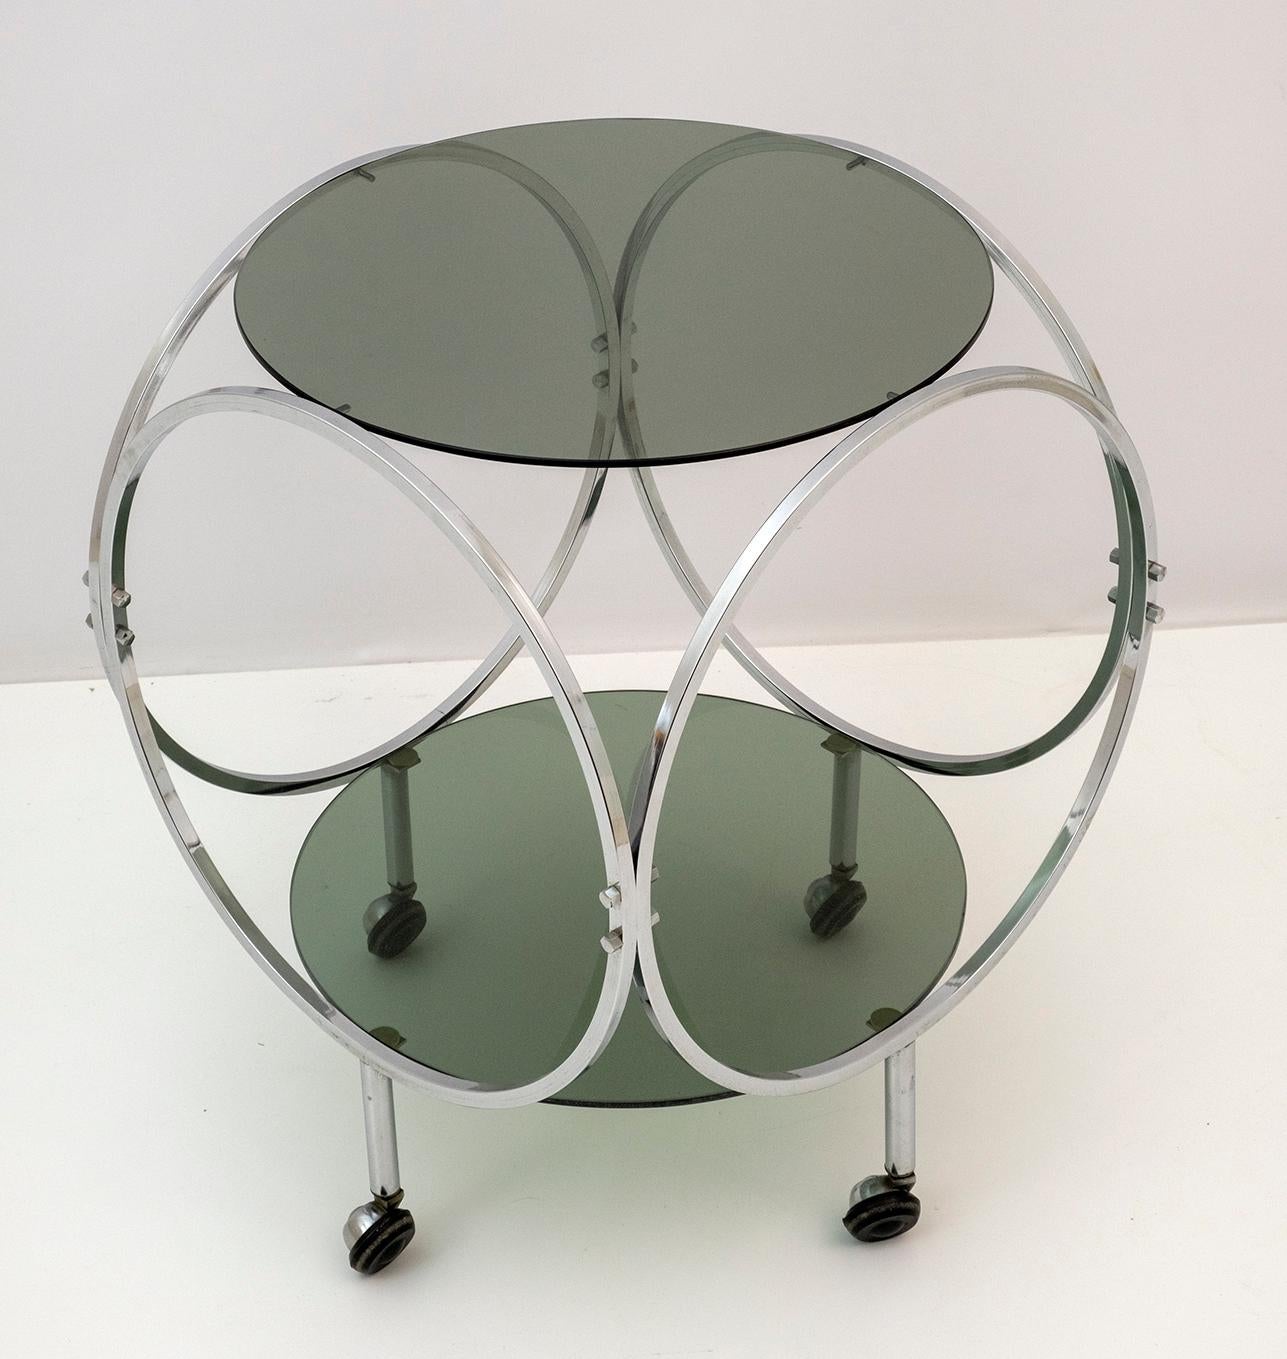 Space Age Vintage Steel and Smoked Glass Coffee Table, 1970s For Sale 5